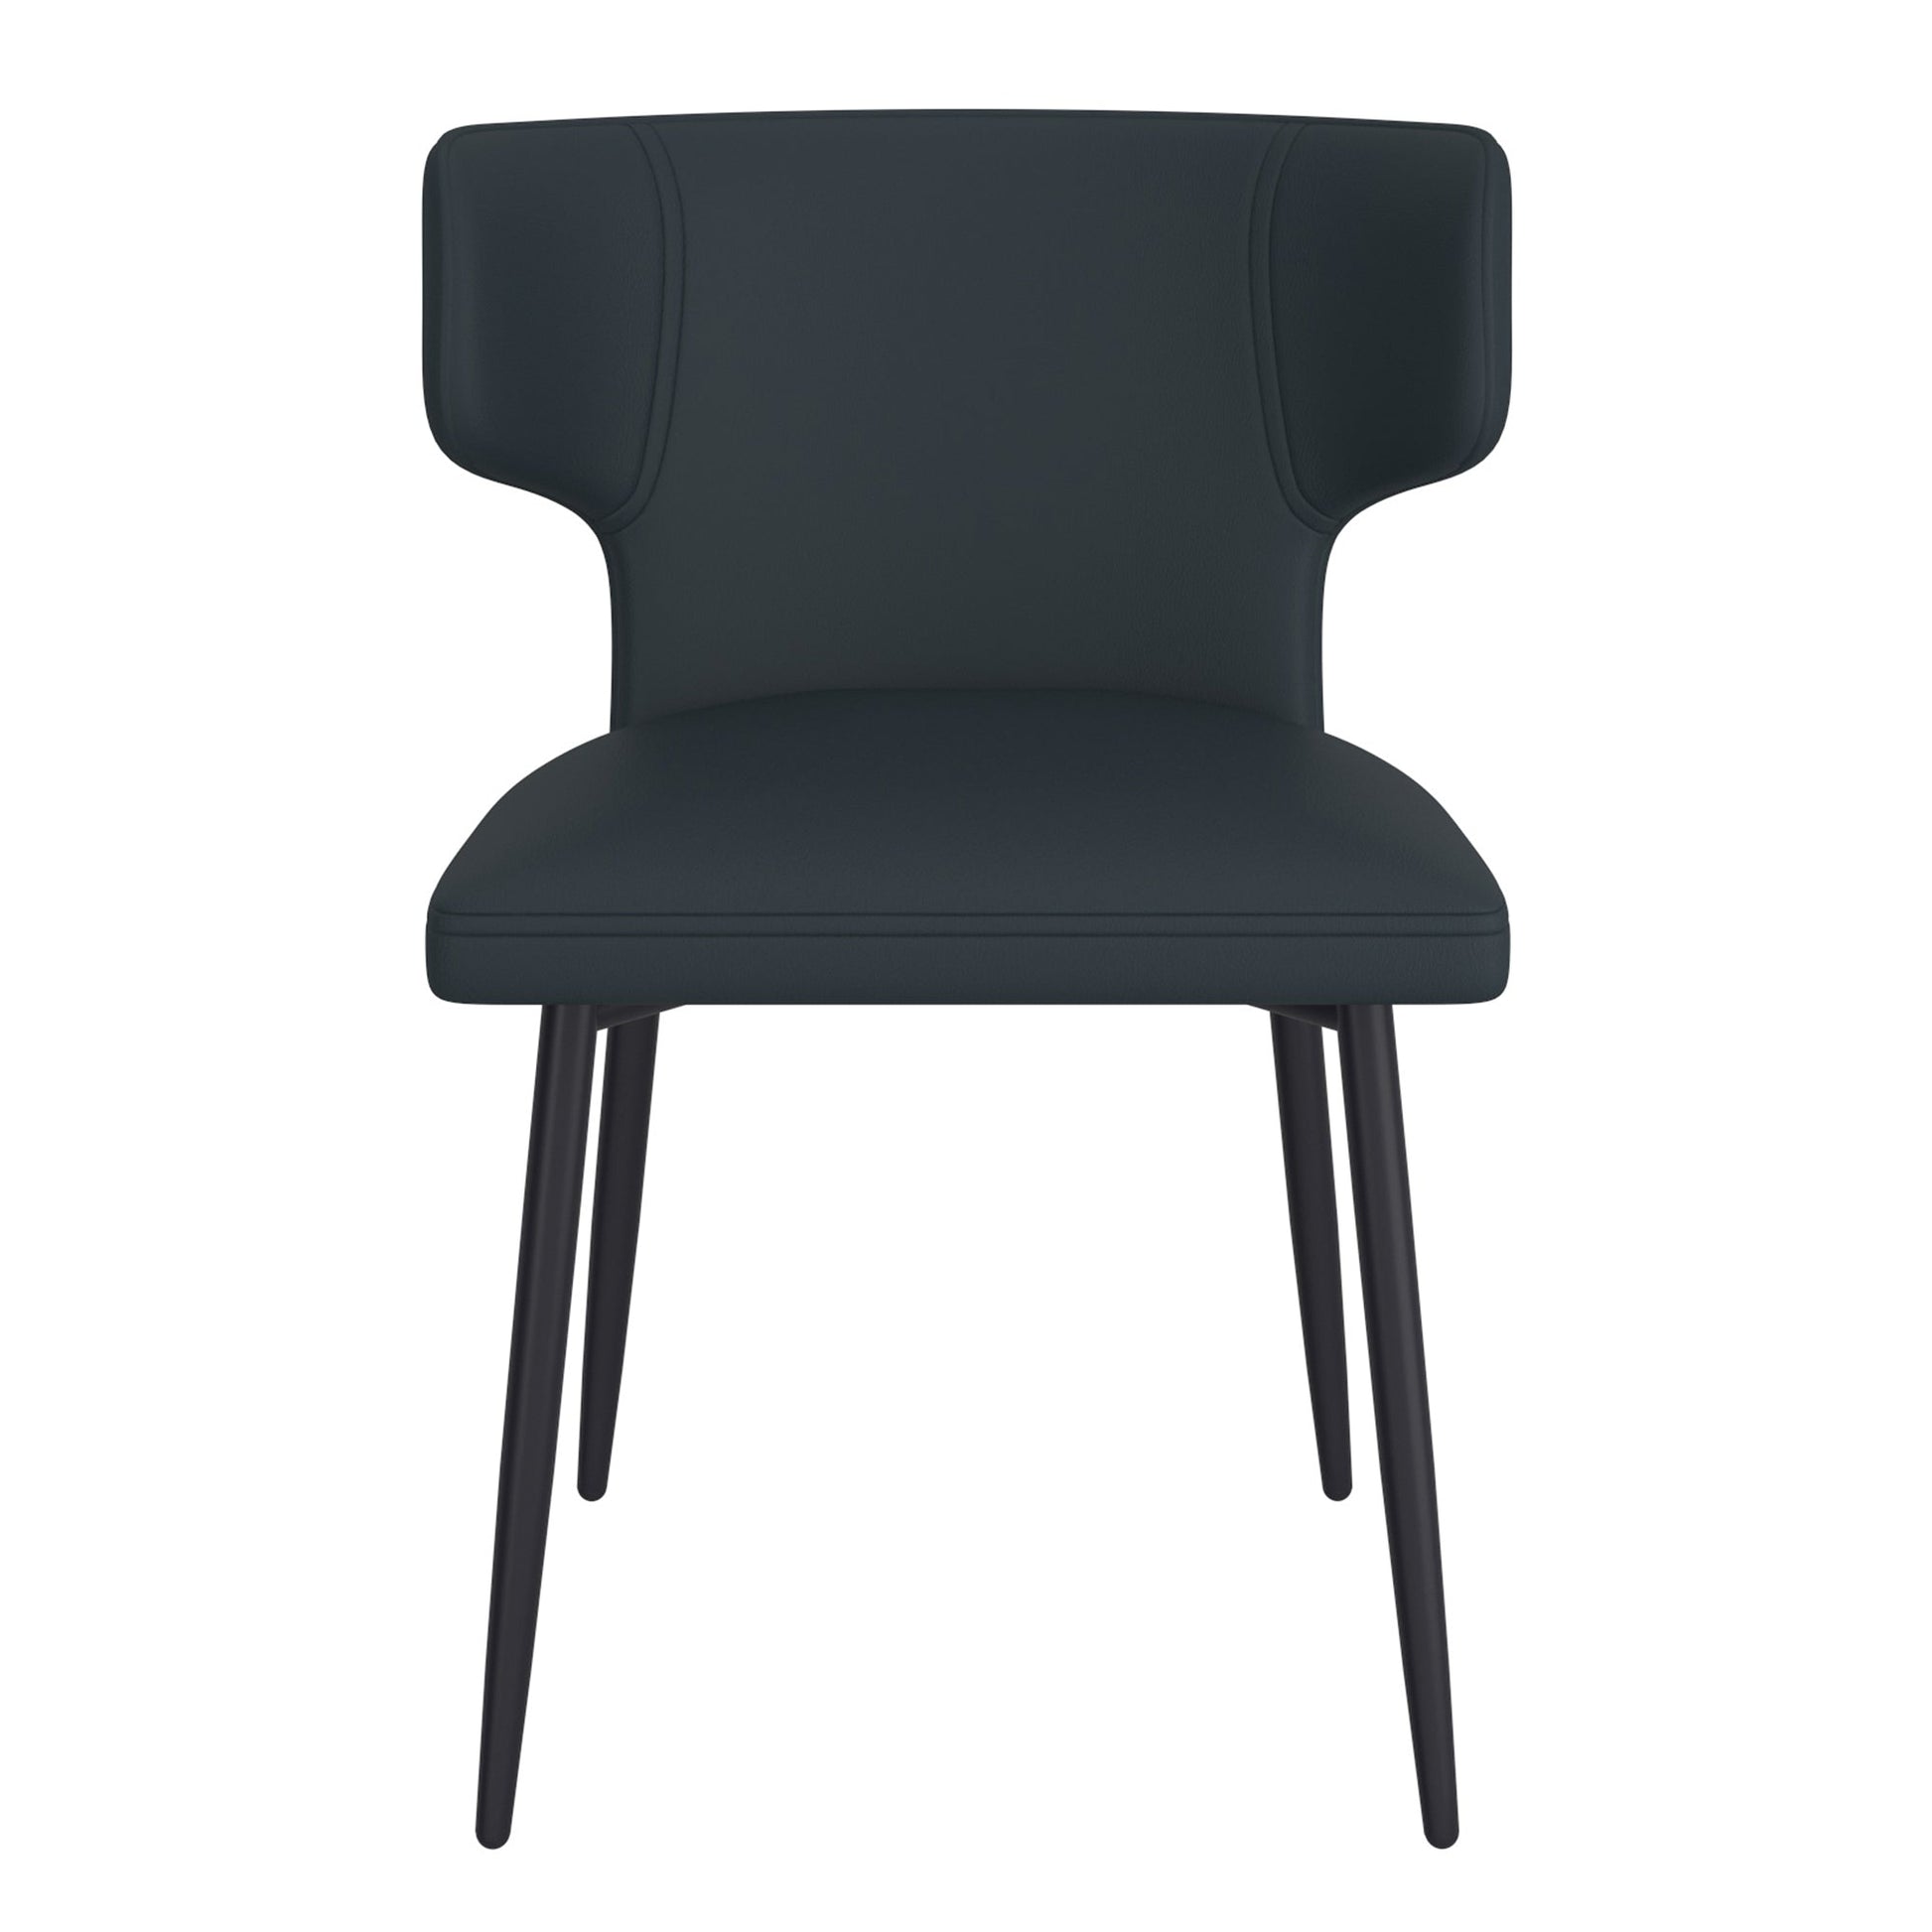 Curvy Back Dining Chairs | Set of 2 | Olis Black Leather - Your Bar Stools Canada